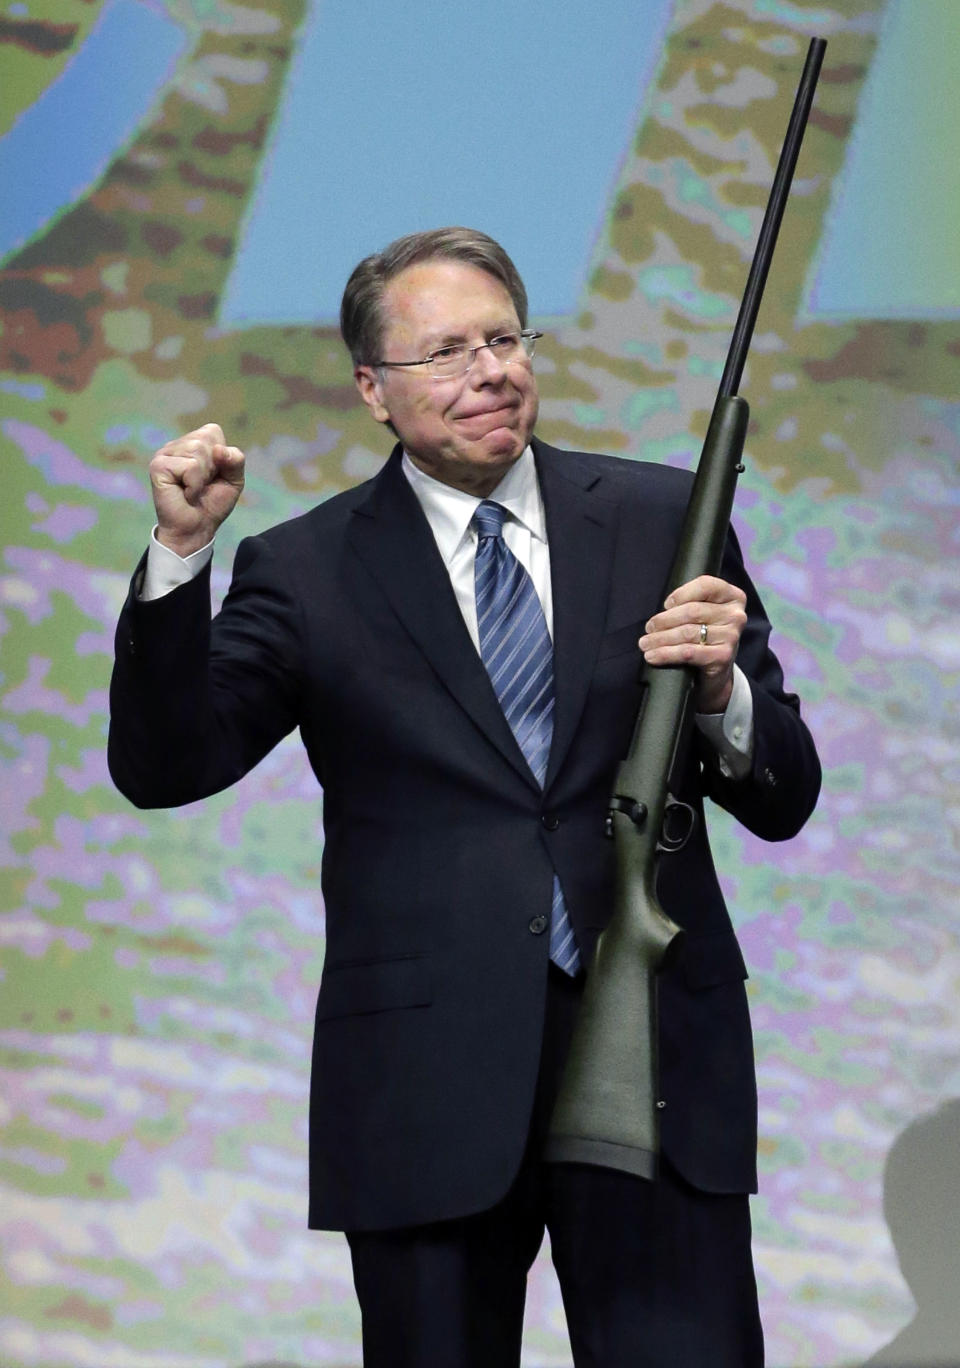 FILE - In this Feb. 23, 2013, file photo, Wayne LaPierre, executive vice president of the National Rifle Association, holds a custom 300 Remington ultra mag during a gun auction after speaking during the Western Hunting & Conservation Expo Banquet at the Salt Palace Convention Center in Salt Lake City. In the latest national furor over mass killings, the tremendous political power of the NRA is likely to stymie any major changes to gun laws. The man behind the organization is LaPierre, the public face of the Second Amendment with his bombastic defense of guns, freedom and country in the aftermath of every mass shooting. (AP Photo/Rick Bowmer, File)